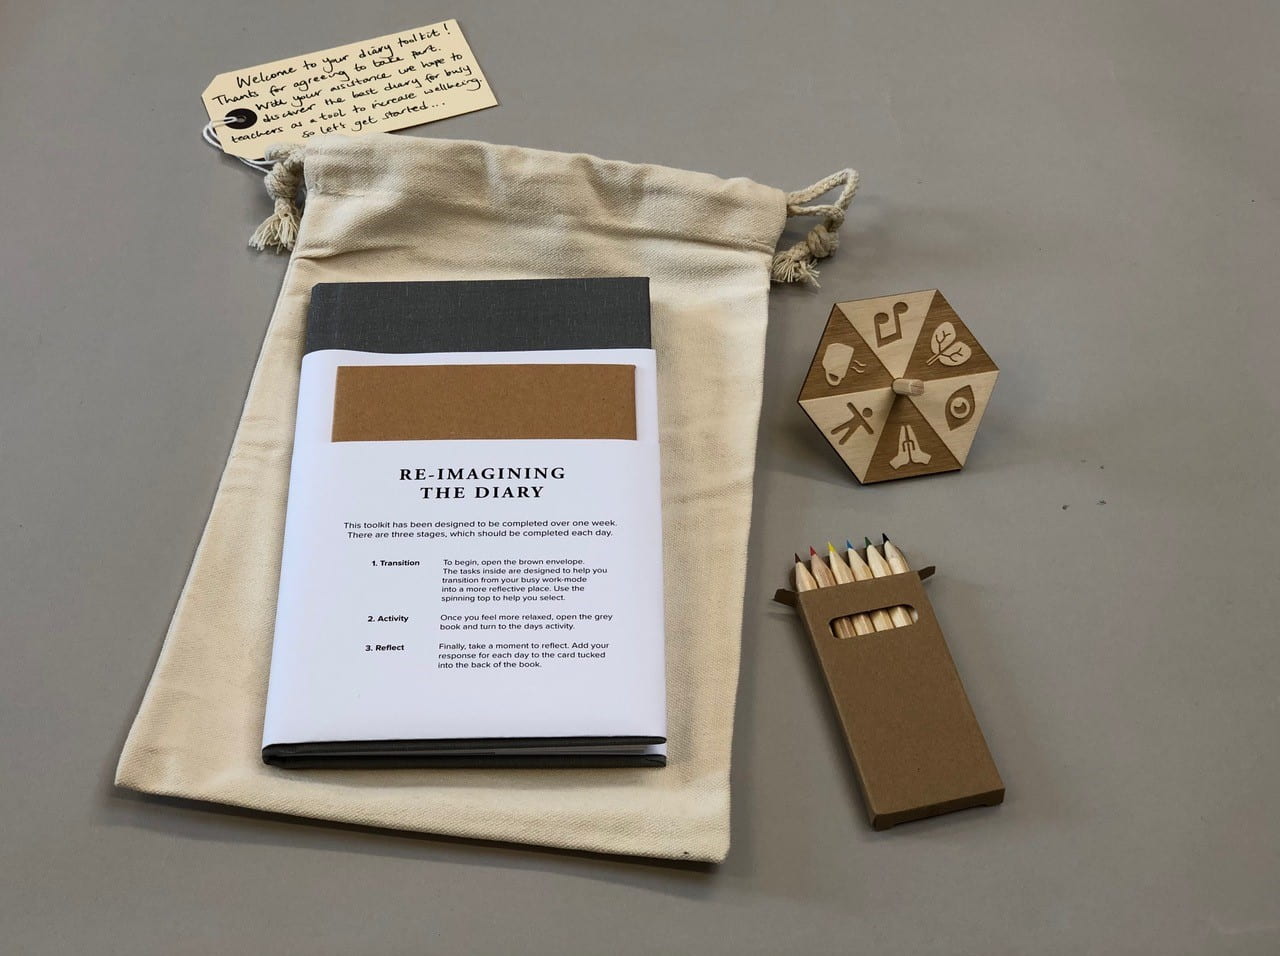 A photograph of the designed diary, a spinning top, and a pack of pencils 